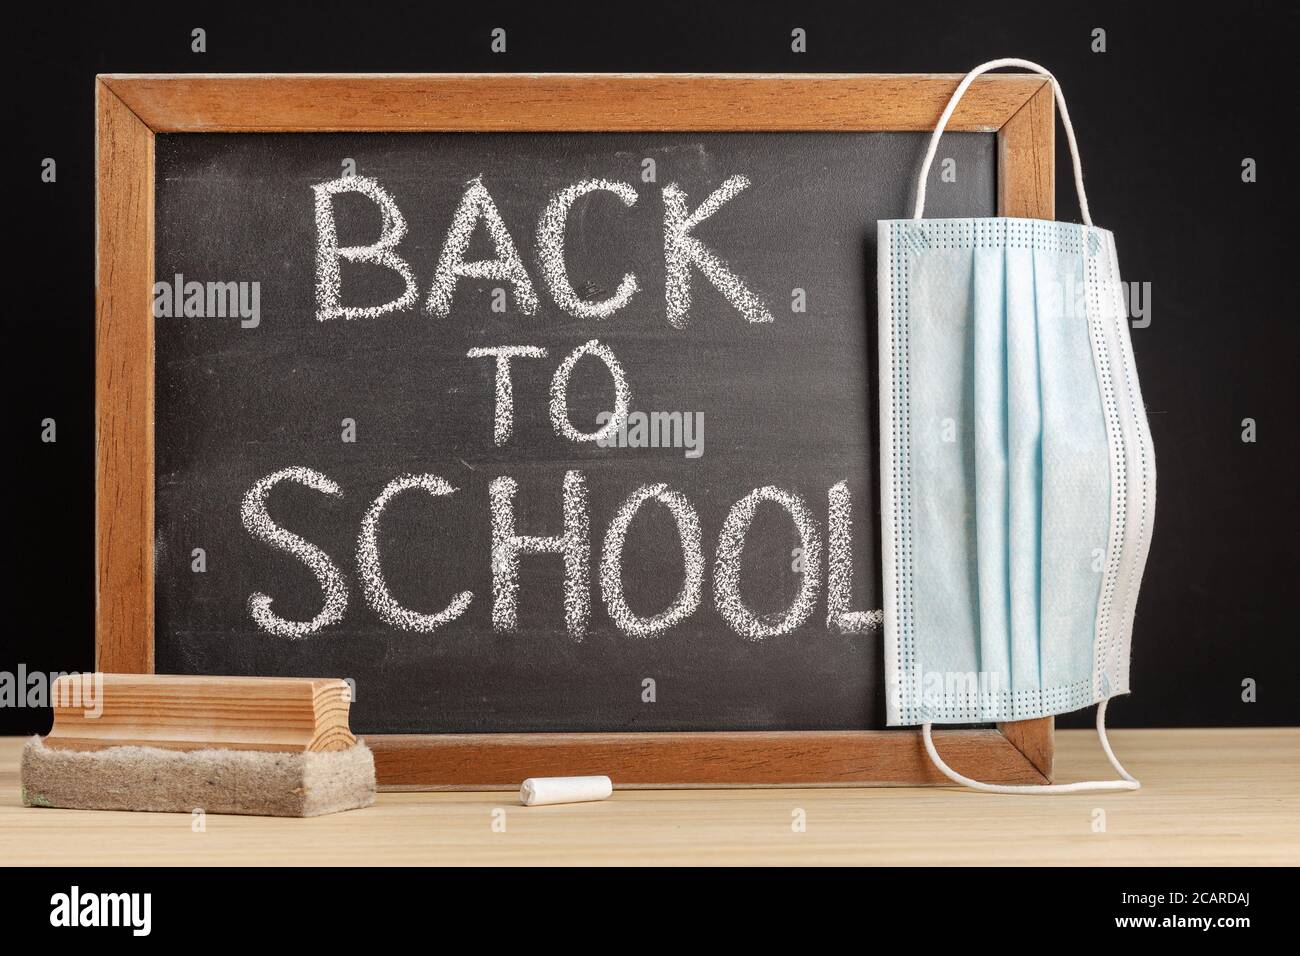 Return to school during covid-19 concept . Chalkboard with handwritten text and face mask hanging on table Stock Photo